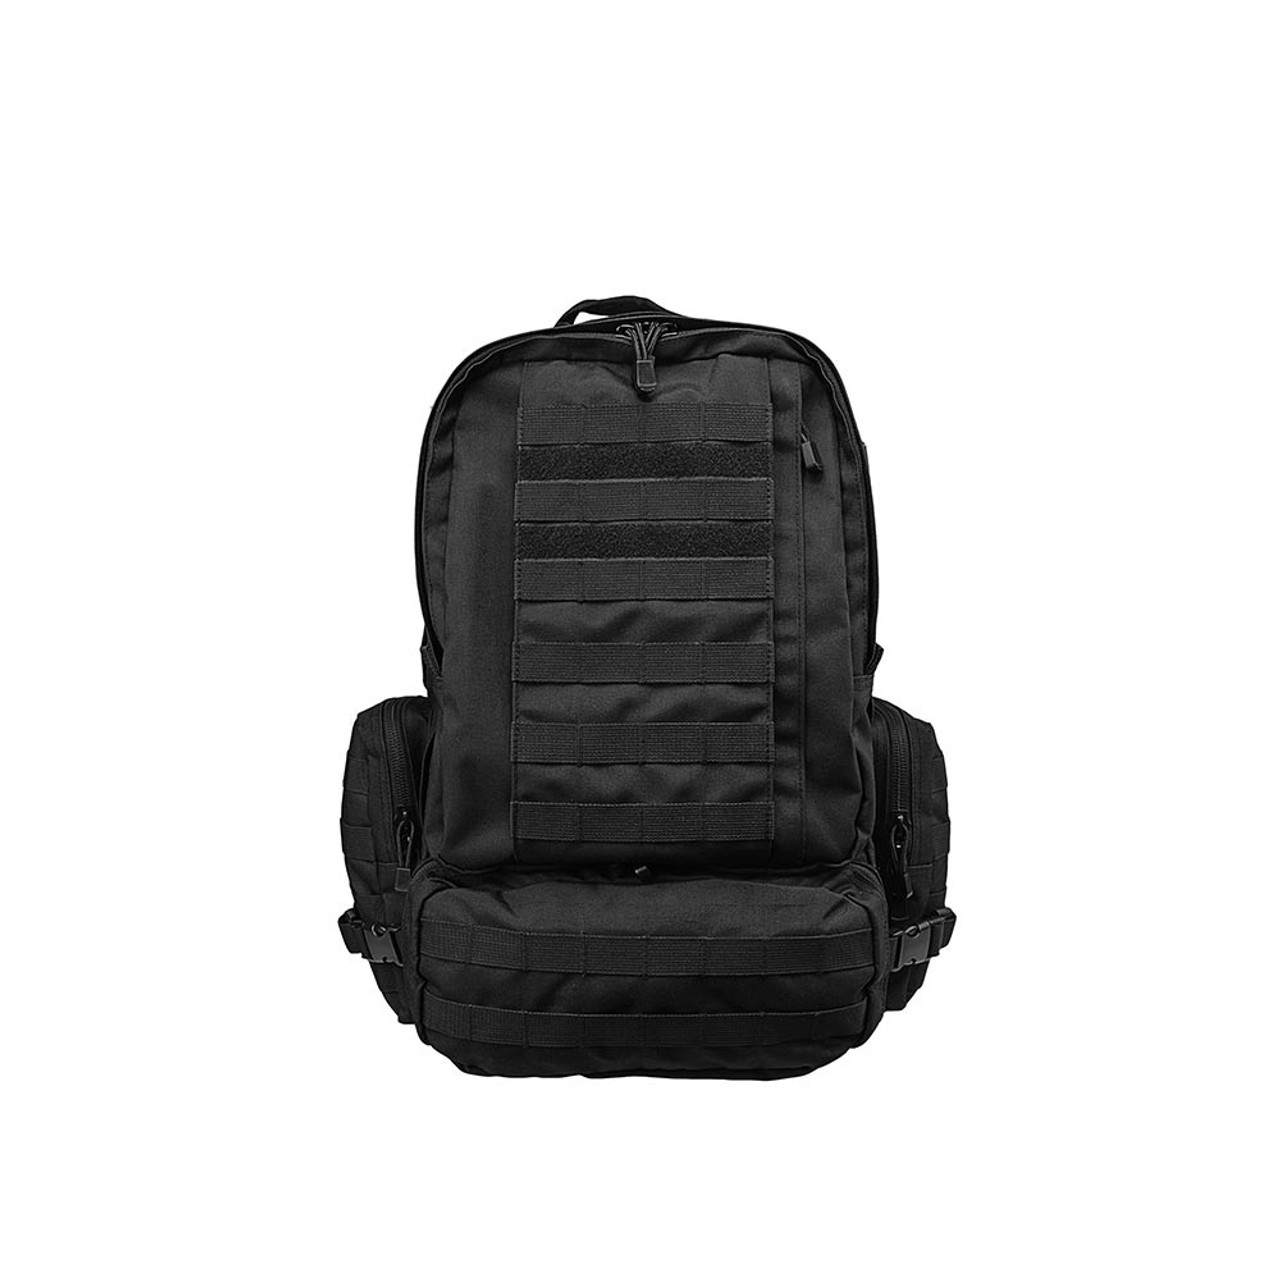 NcSTAR CB3D3013B 3 Day Tactical Camping Hiking Backpack